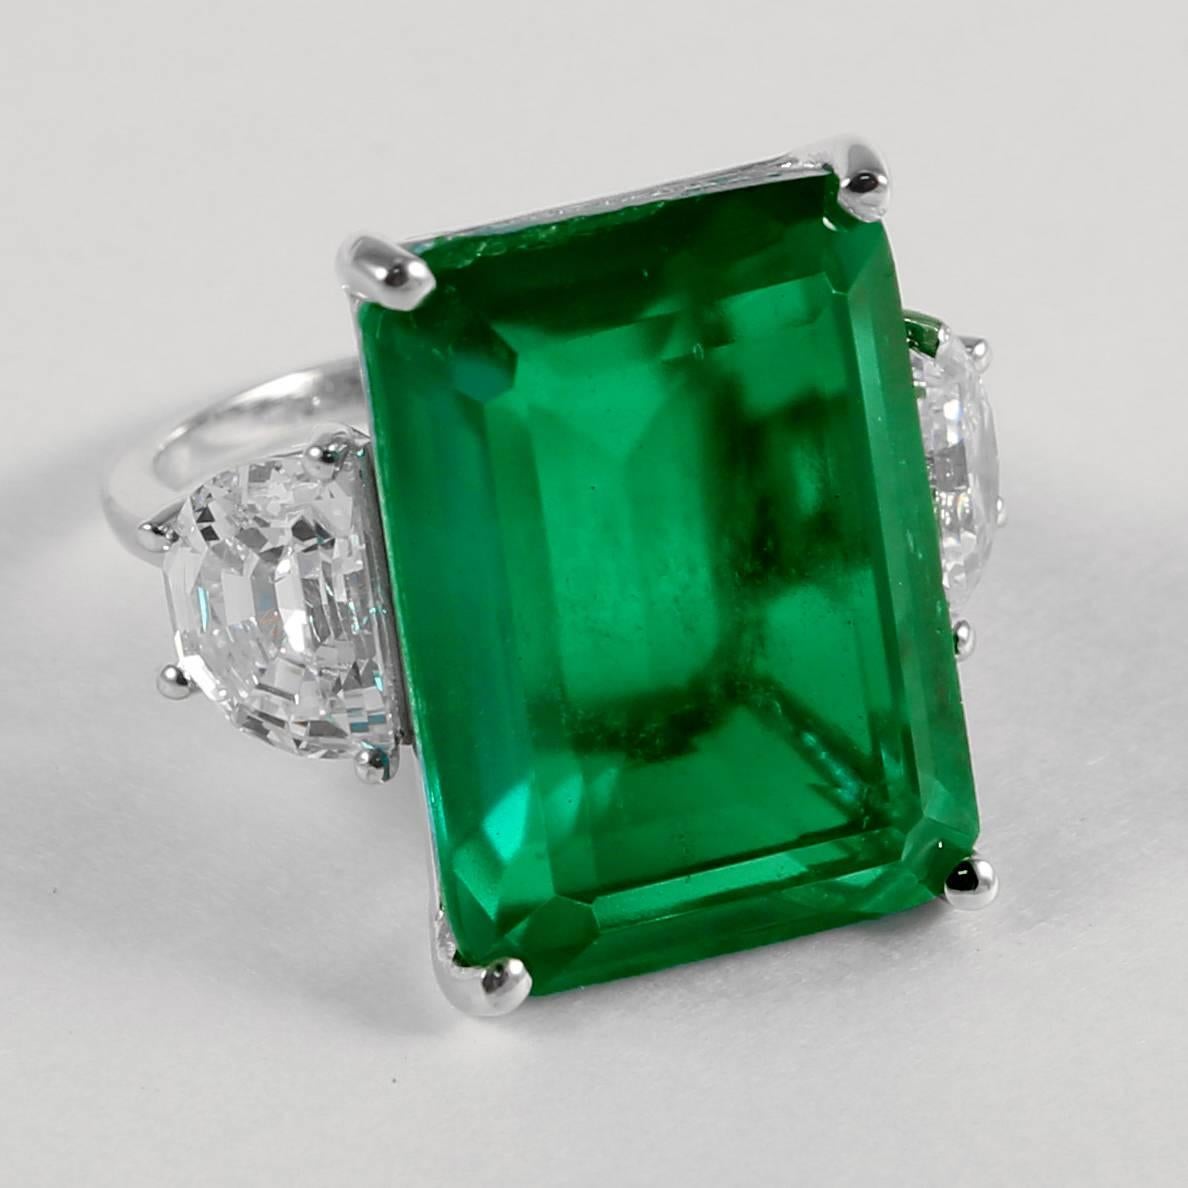 Magnificent Costume Jewelry  Amazing faux 25-carat rectangular step-cut man-made emerald made of the finest green 
natural material faux emerald set with half moons on either side set in genuine rhodium. This ring has an amazing warm glow. It